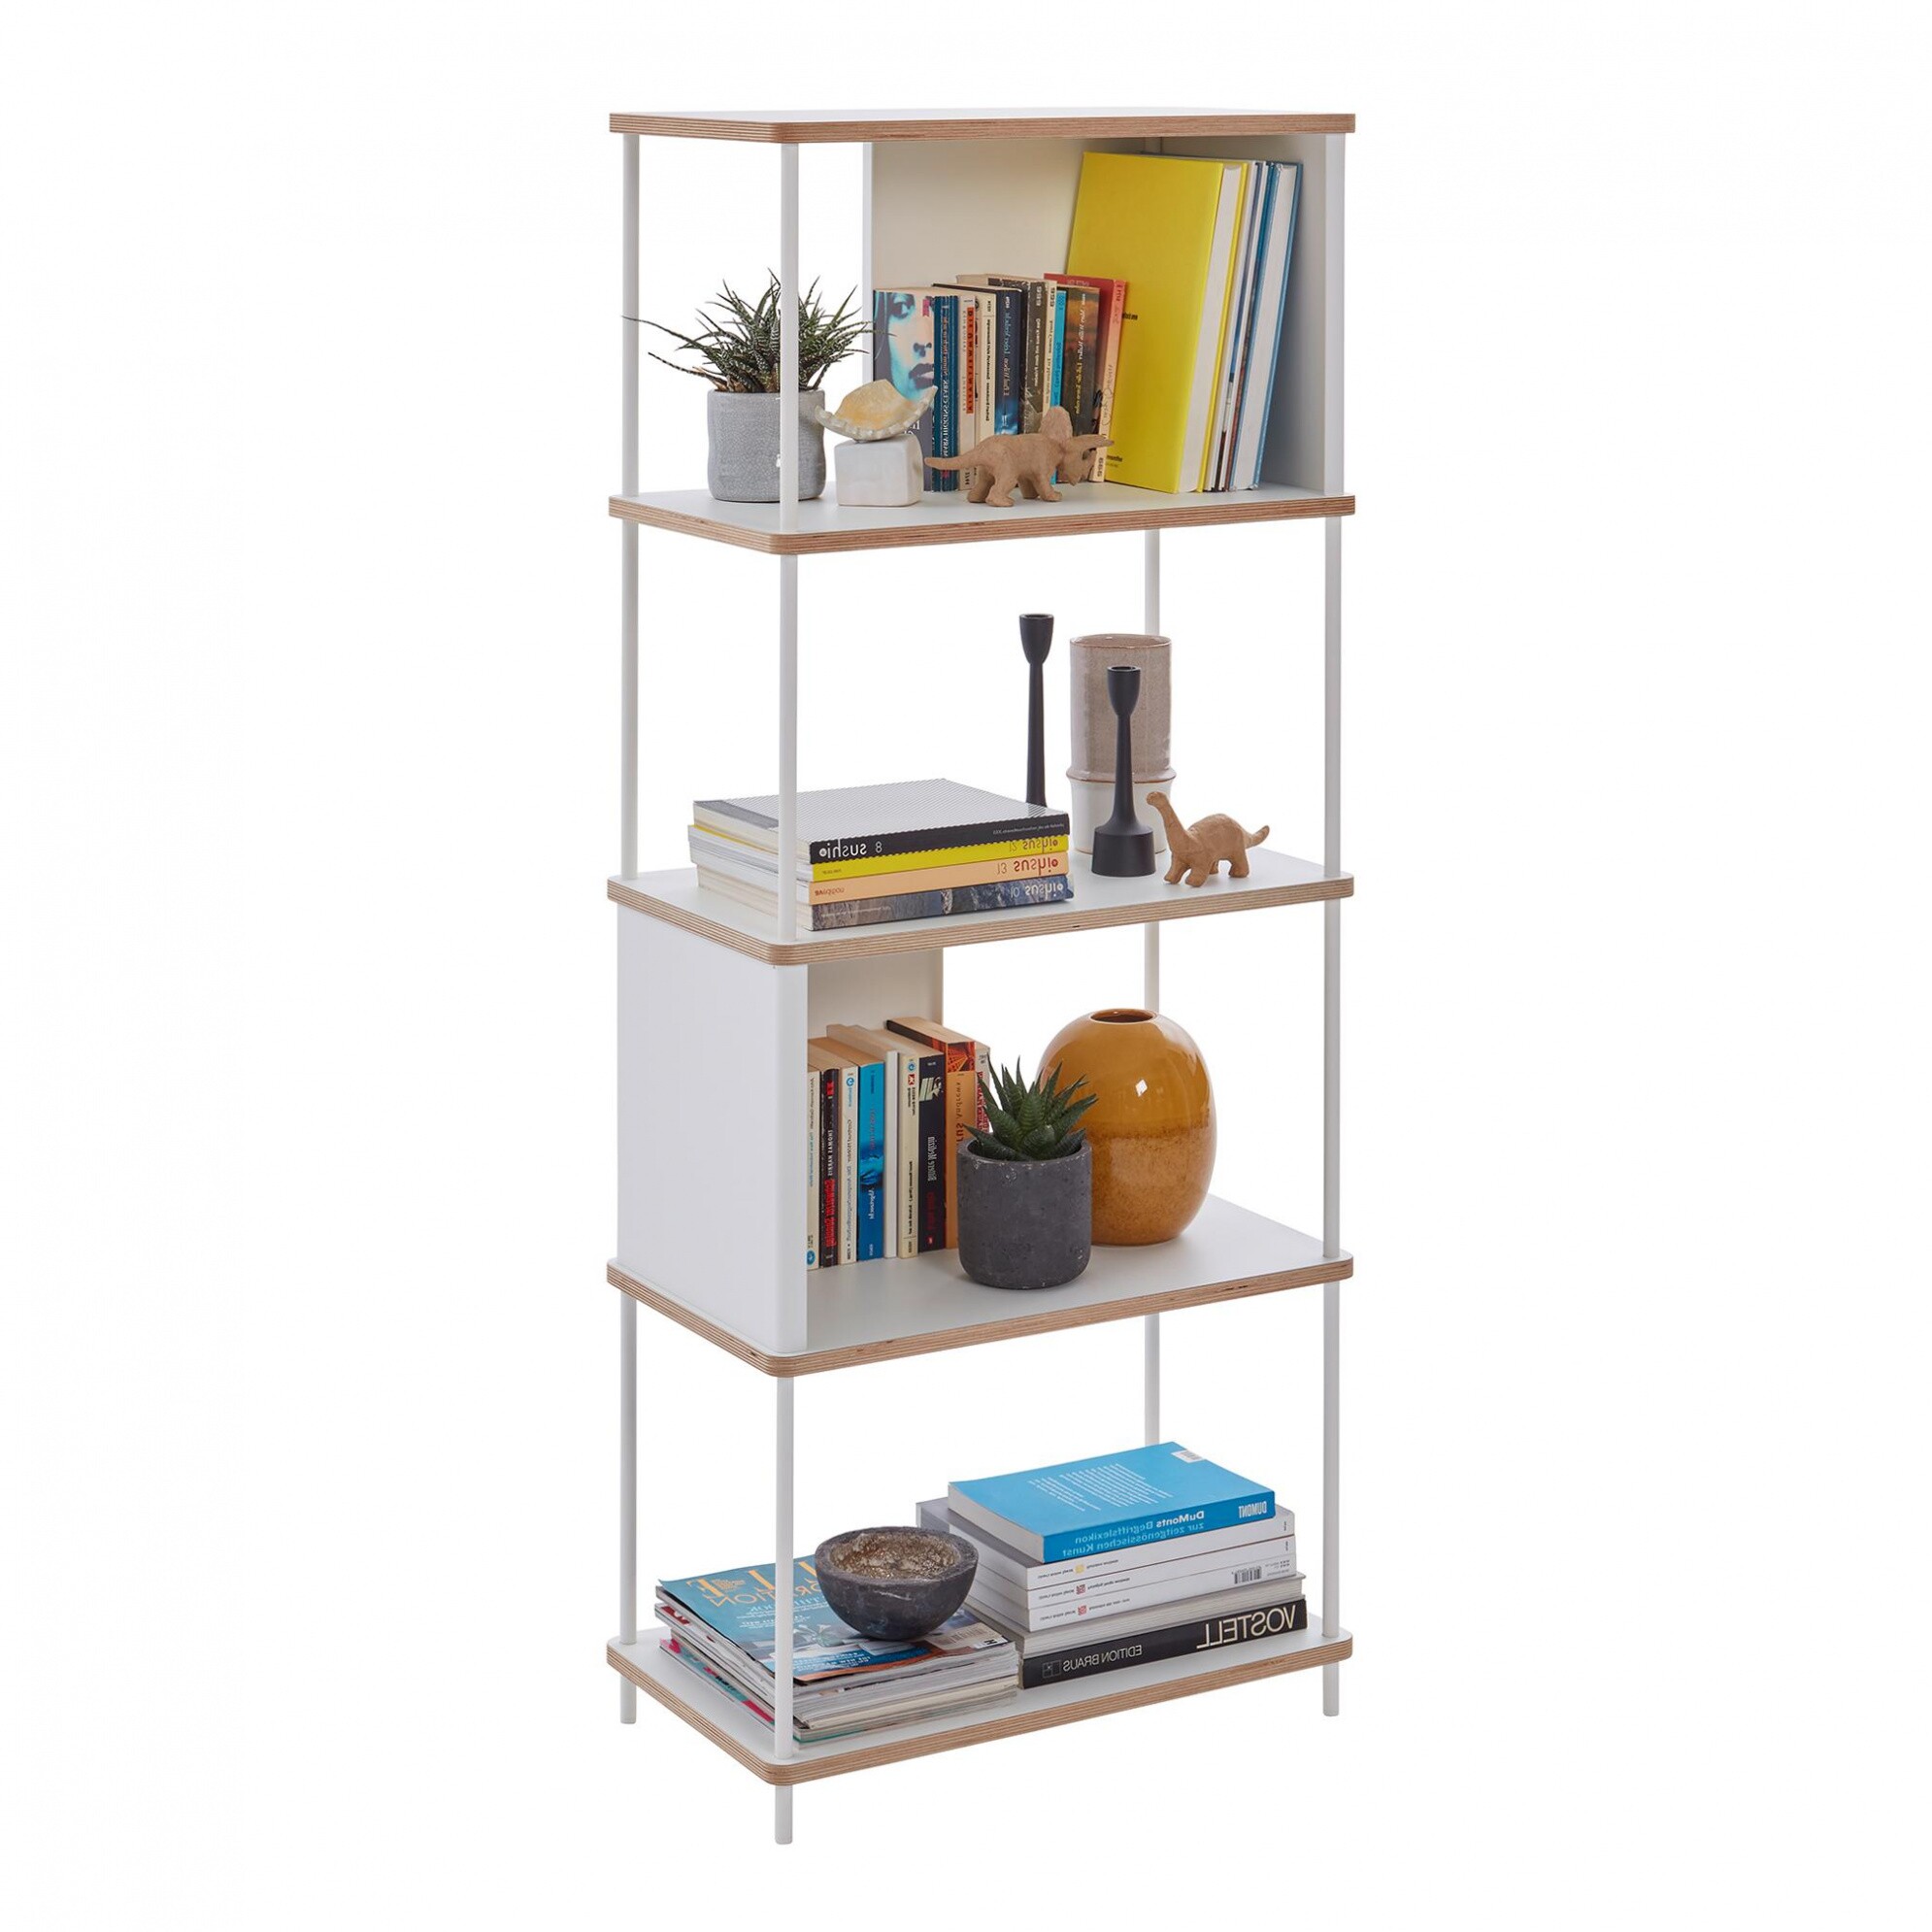 Müller Small Living Pal Shelving System, Small Free Standing Shelves